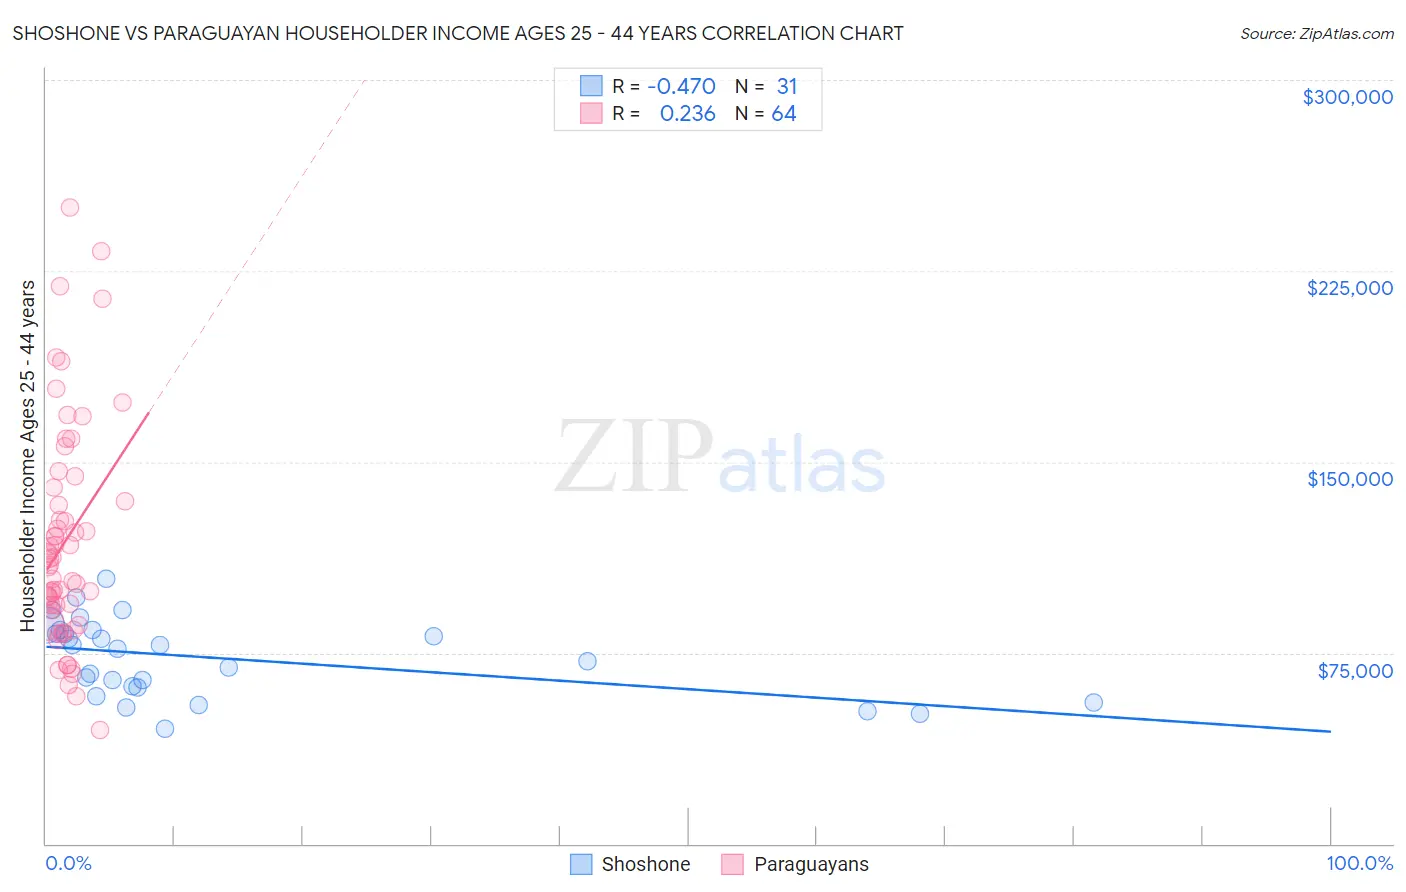 Shoshone vs Paraguayan Householder Income Ages 25 - 44 years